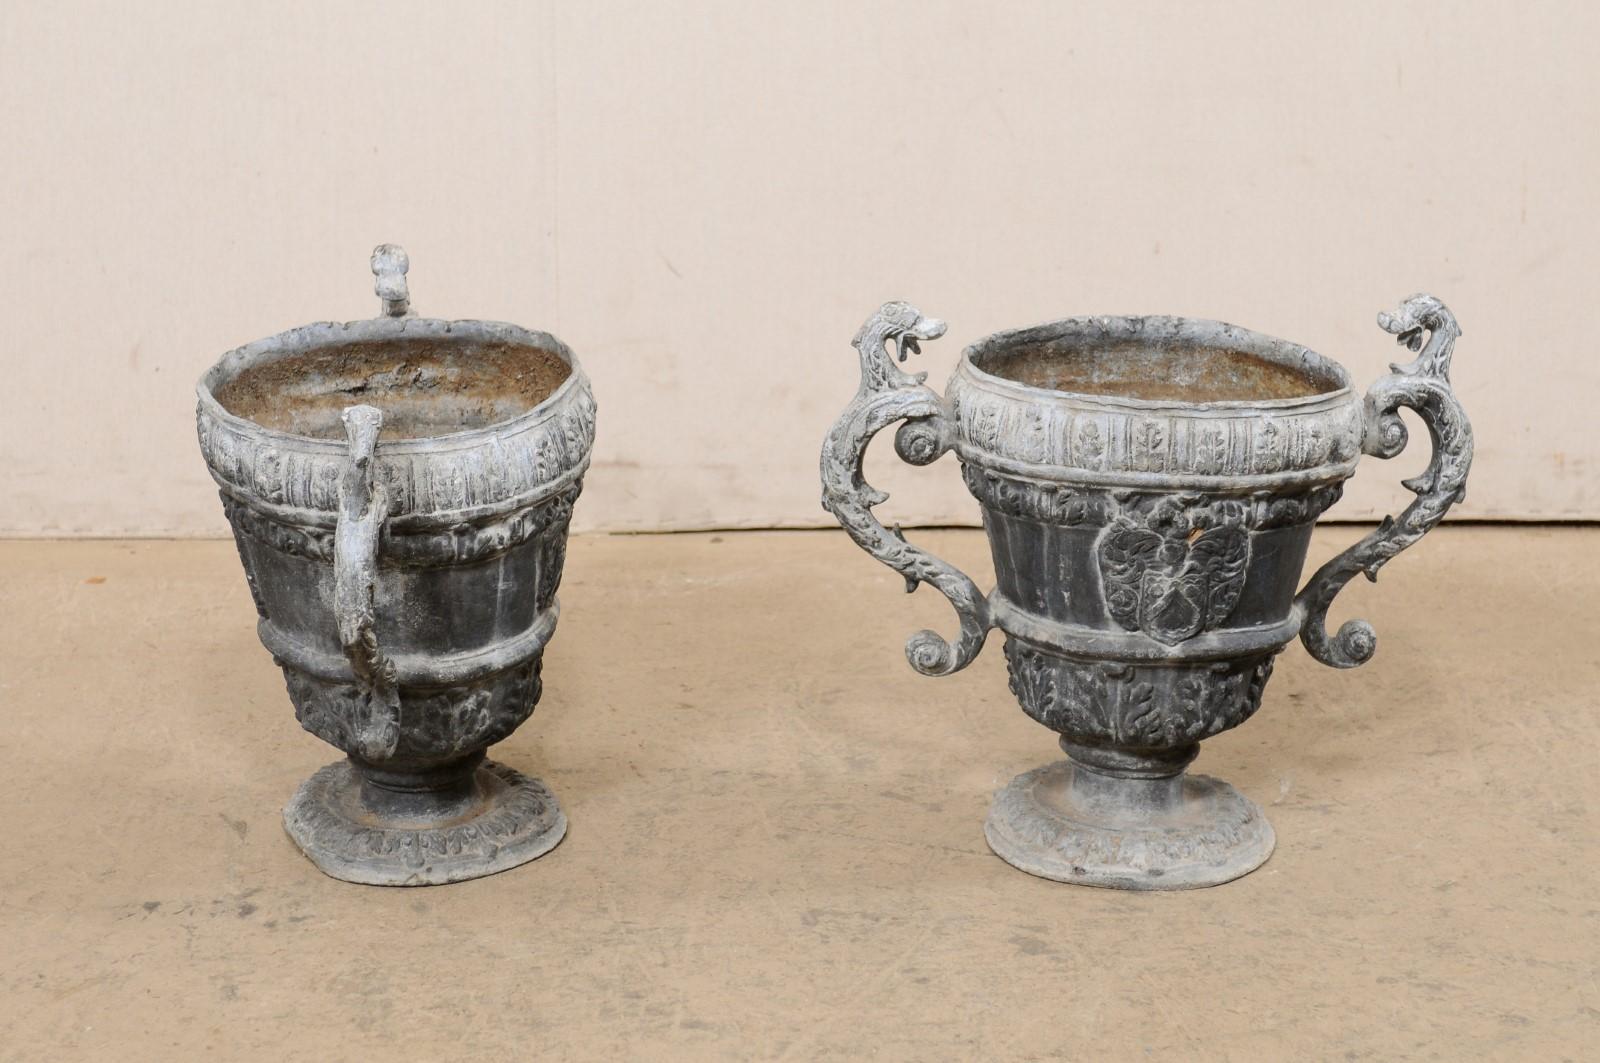 French Pair of 18th C. Decorative Lead Urn Planters for Garden Patio For Sale 3